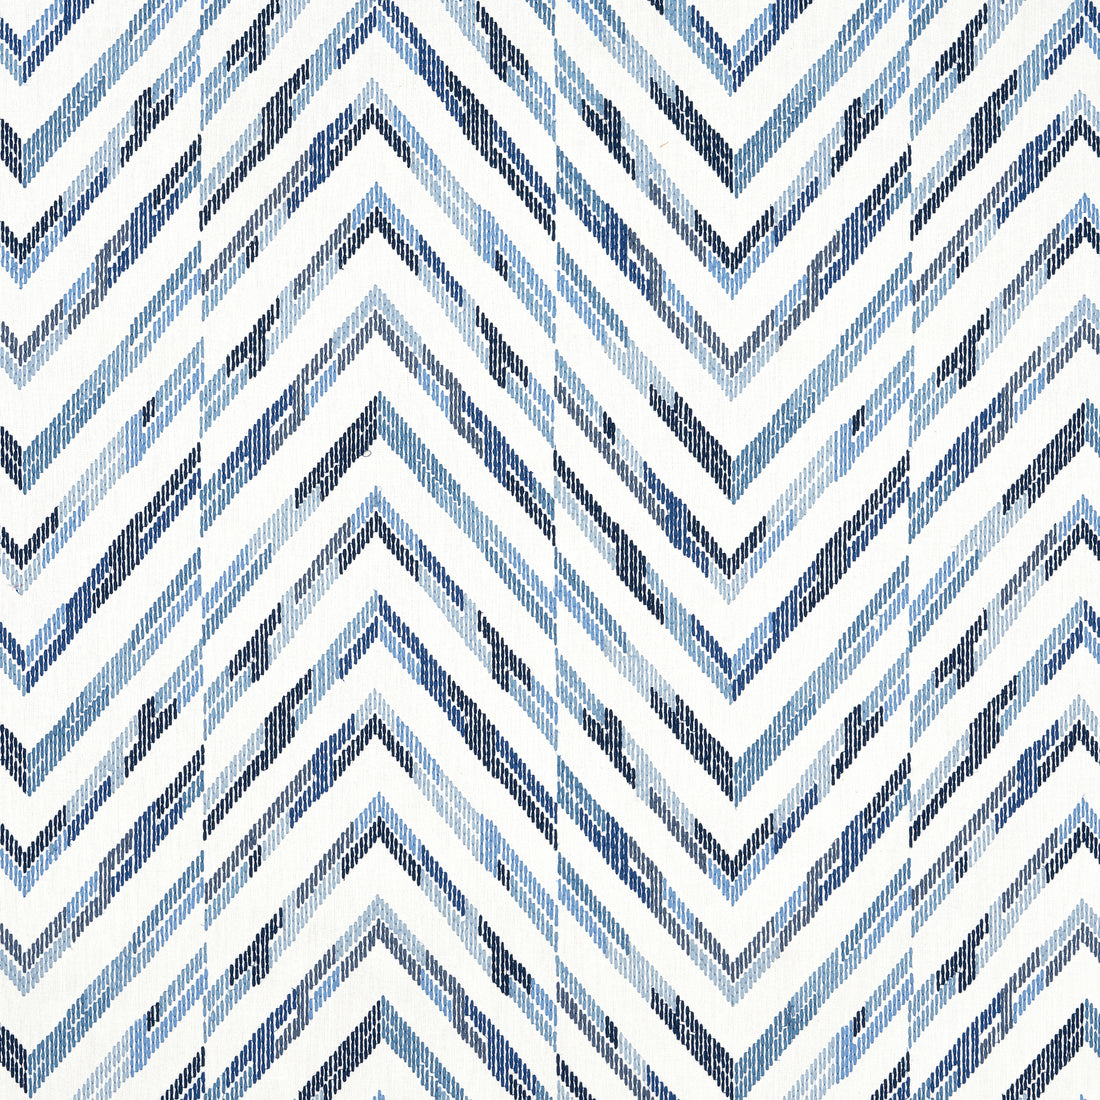 Hamilton Embroidery fabric in blue and white color - pattern number W714346 - by Thibaut in the Canopy collection